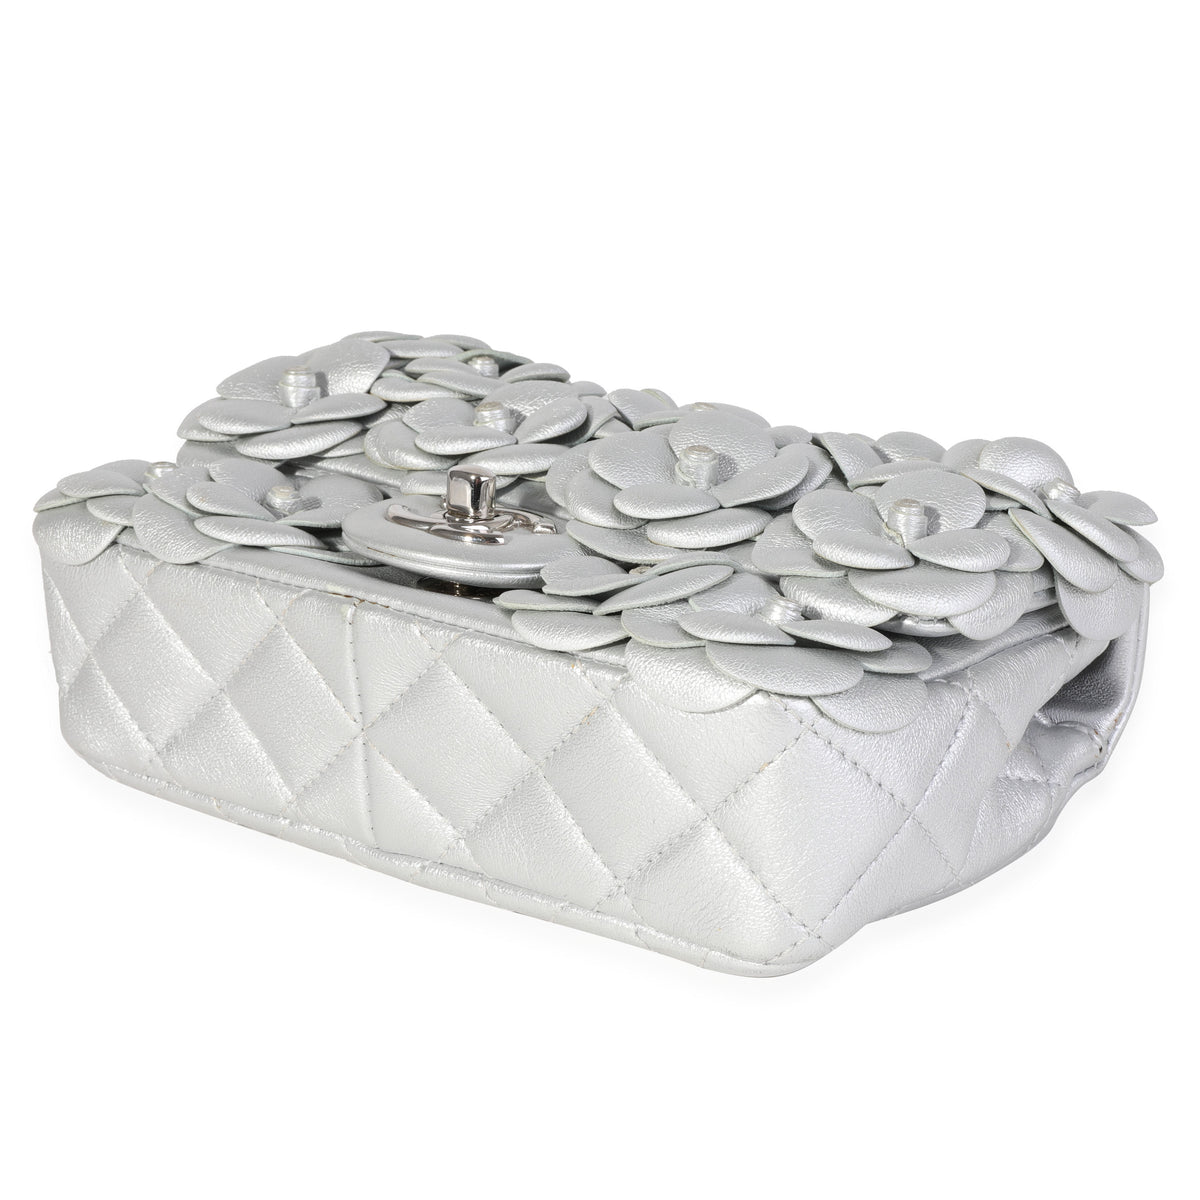 Chanel Silver Quilted Leather Camellia Mini Rectangular Flap Bag